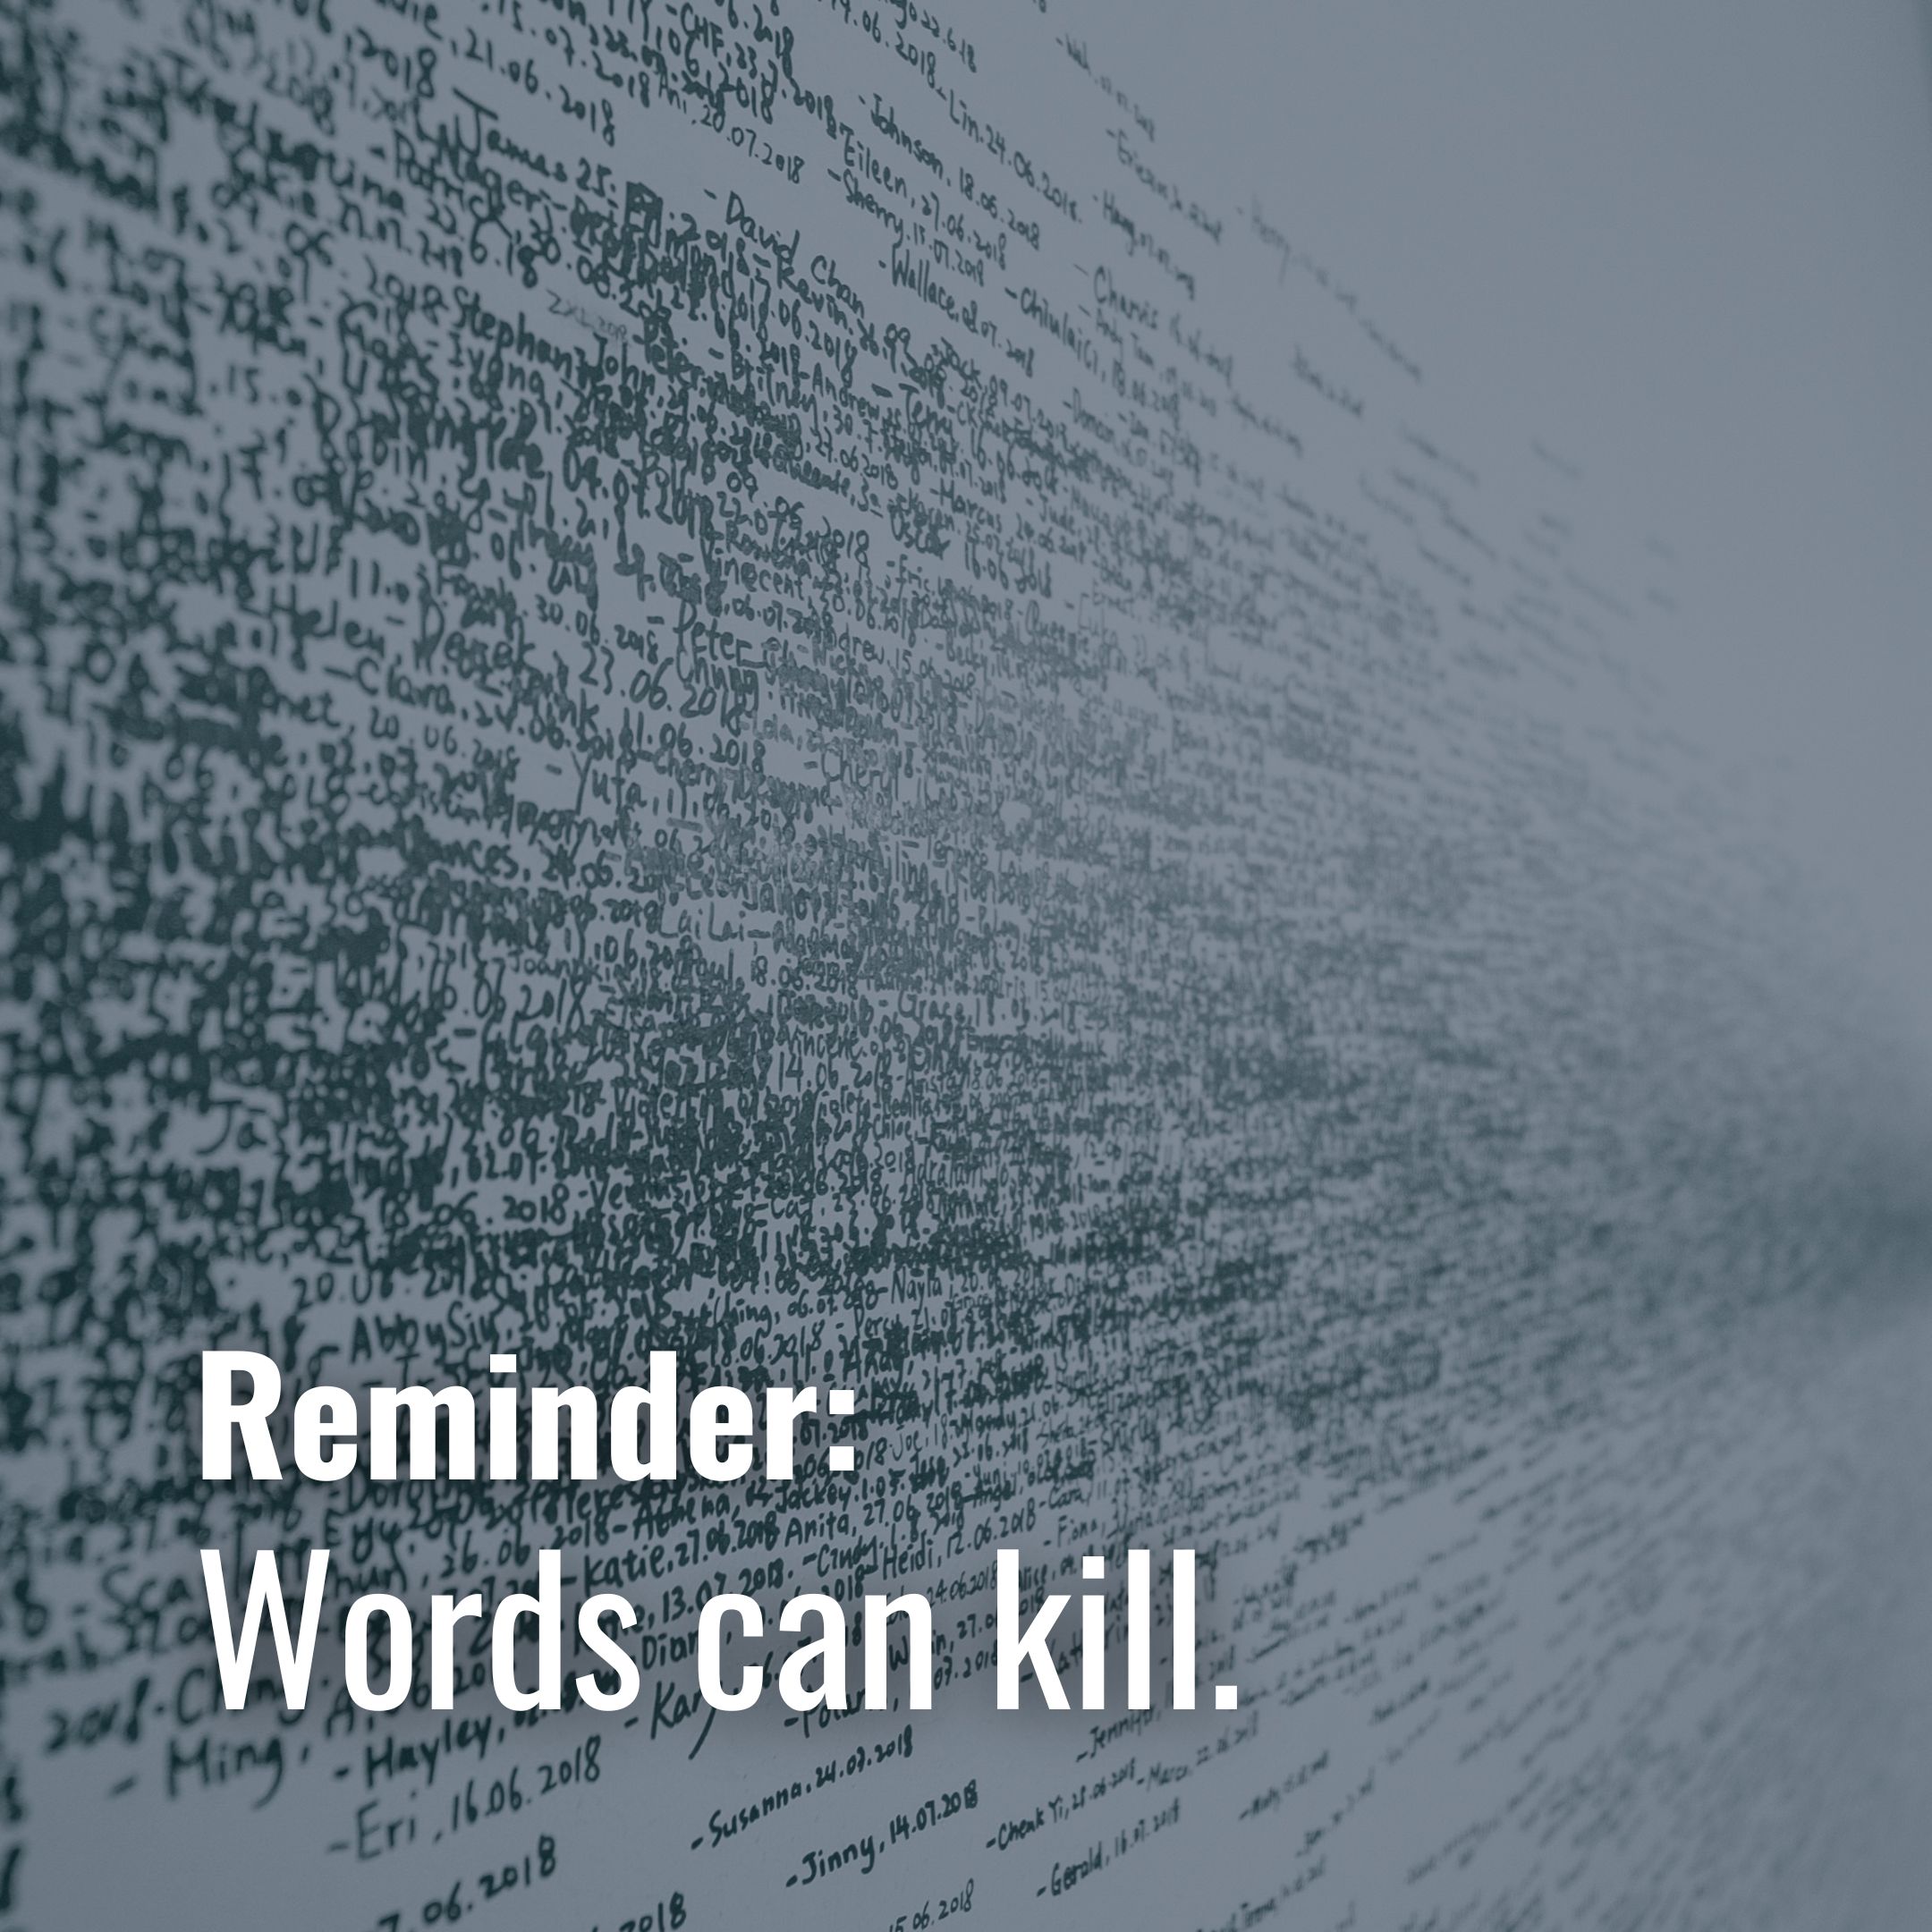 Words can kill.